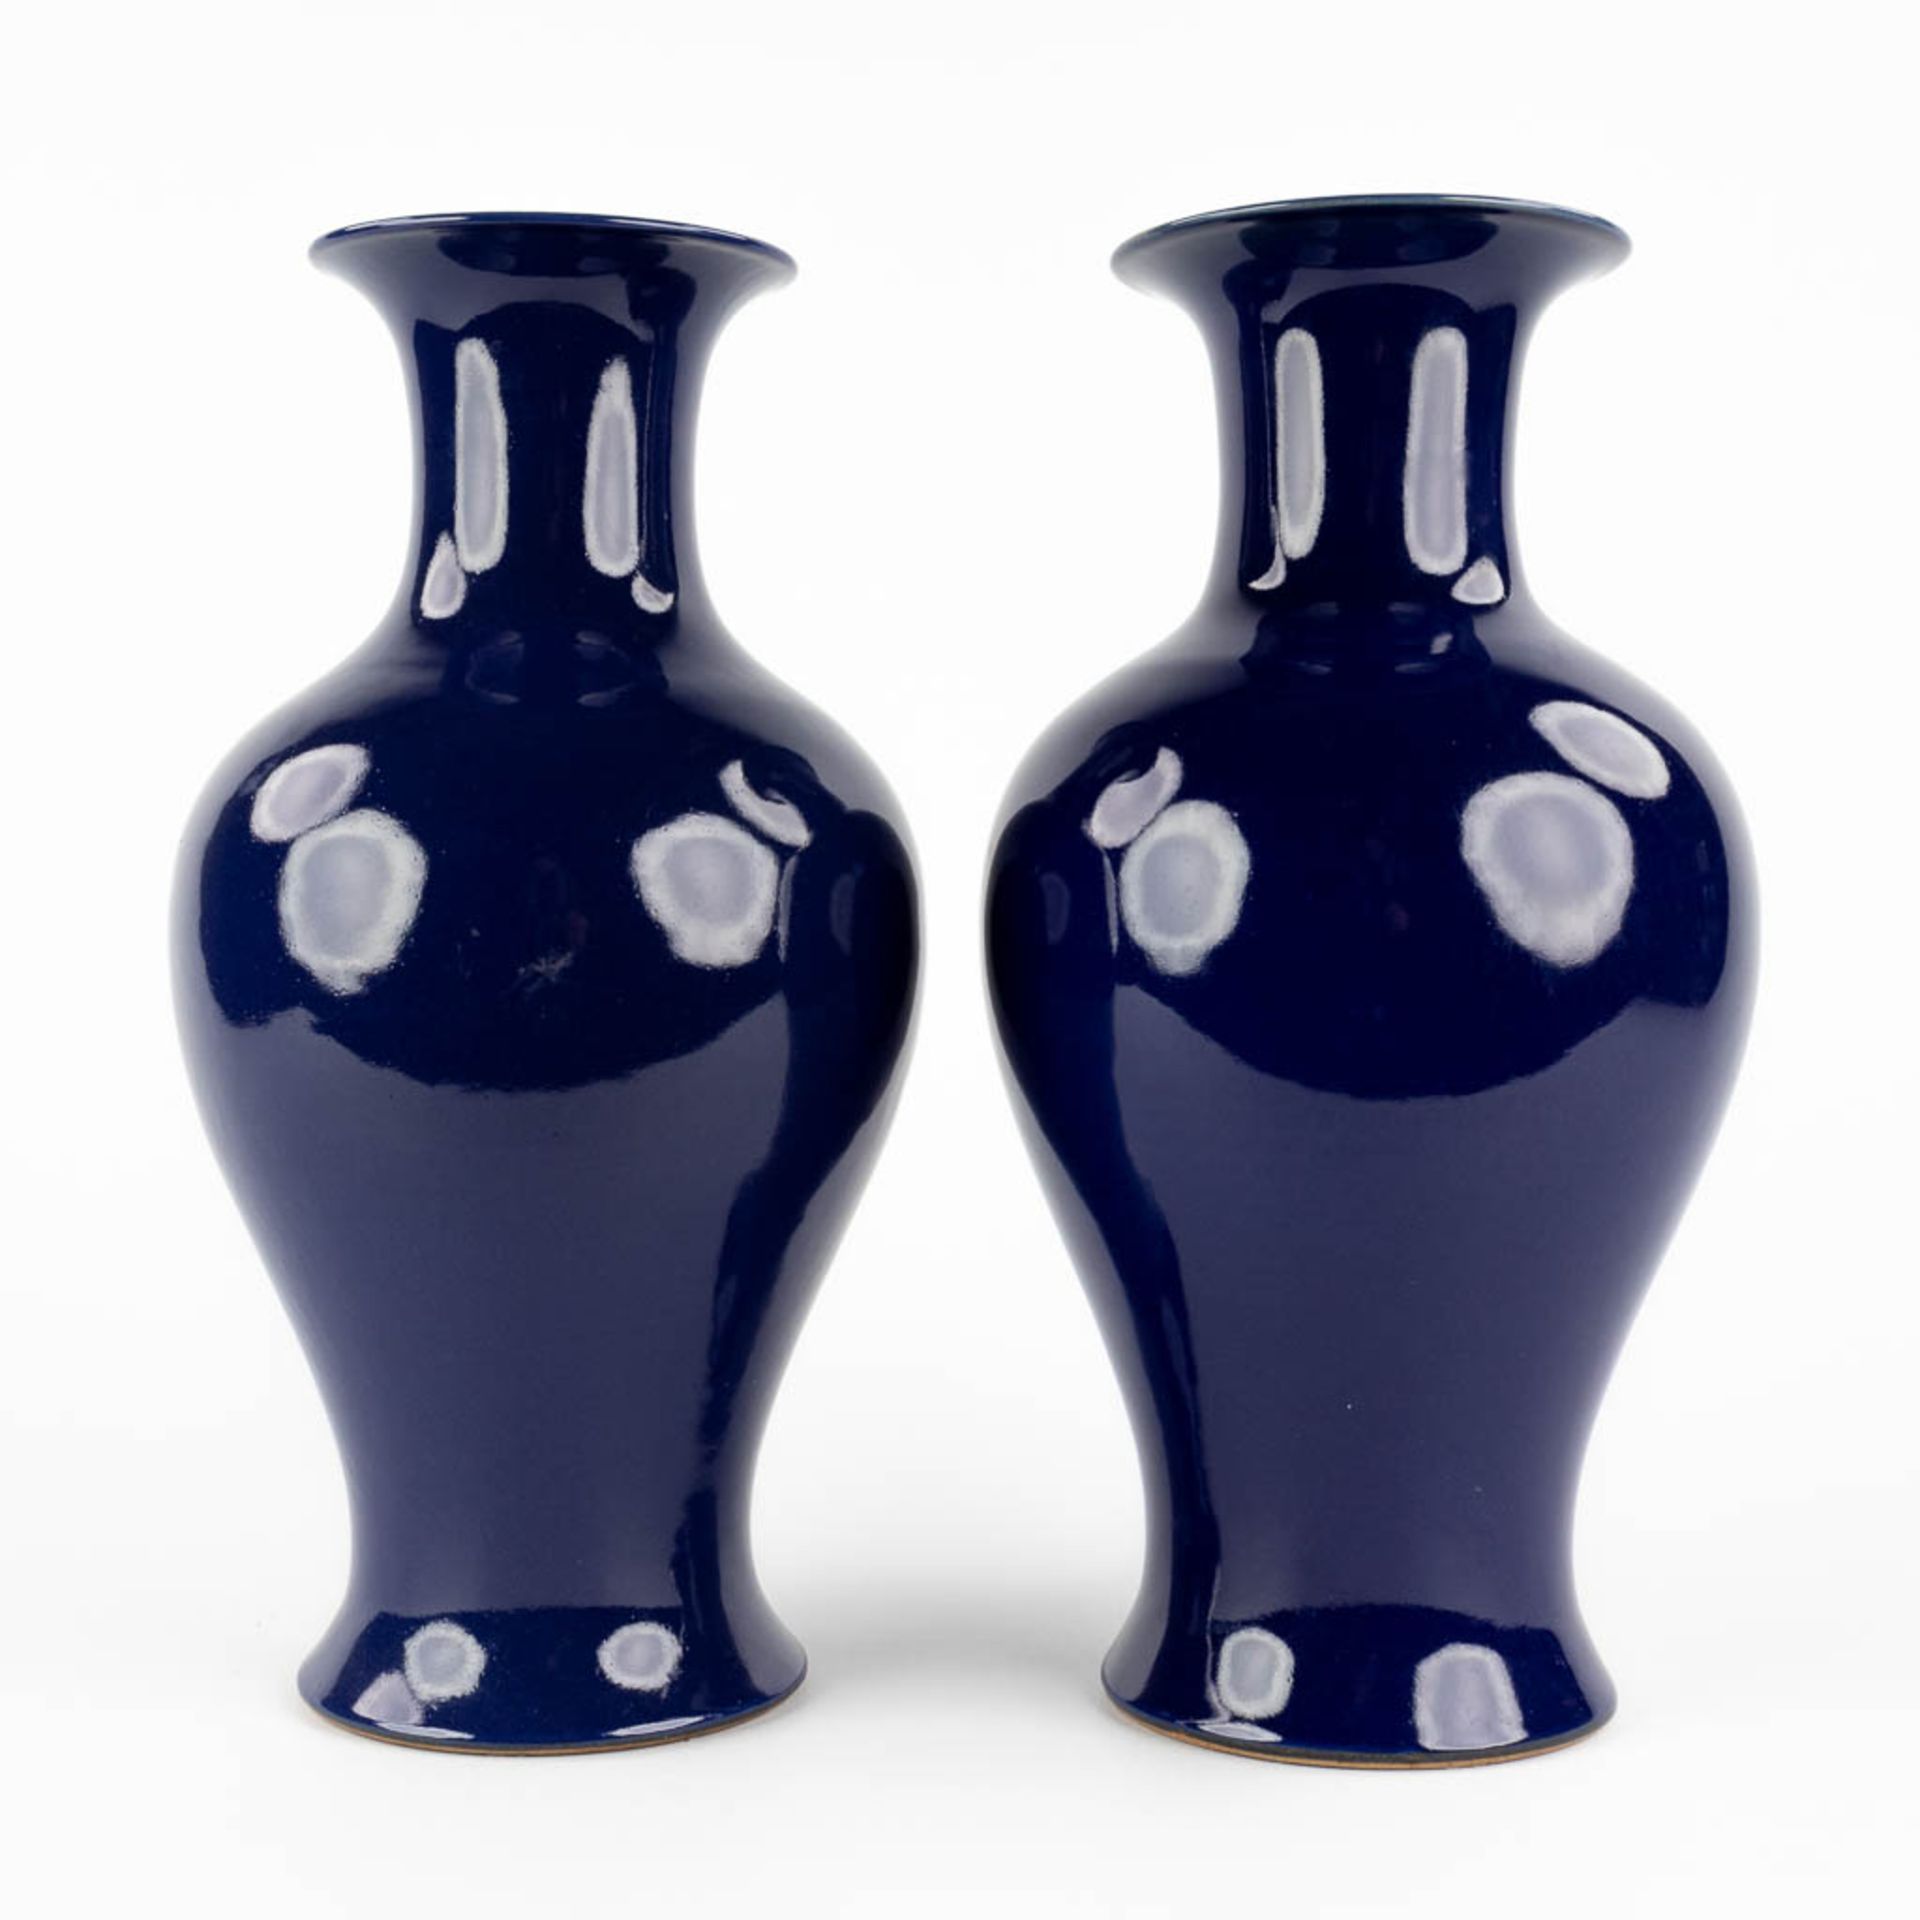 A pair of decorative Chinese blue-glazed vases. 20th C. (H:36 x D:18 cm) - Image 5 of 9